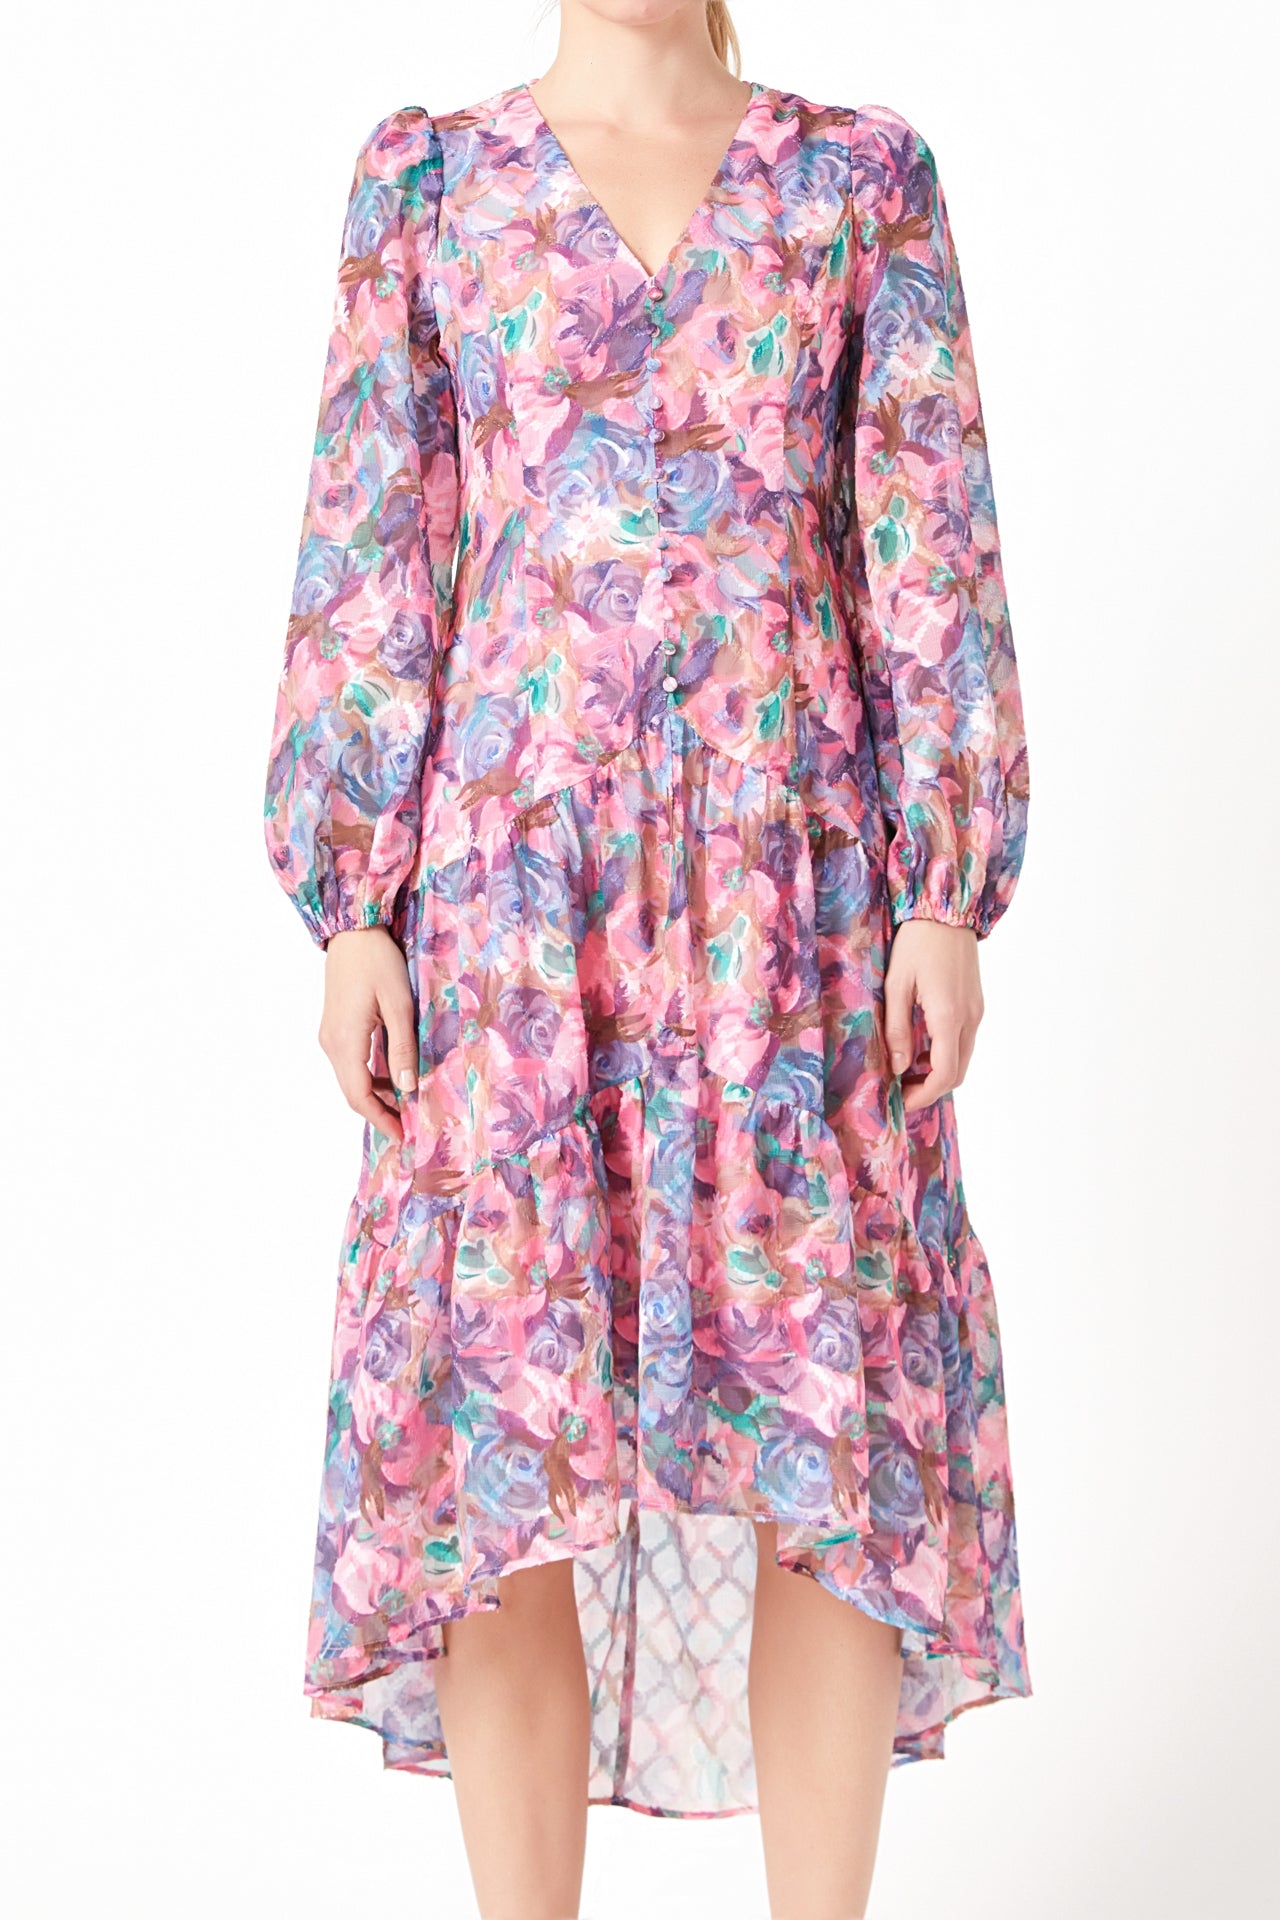 ENDLESS ROSE - Buttoned Floral High Low Dress - DRESSES available at Objectrare